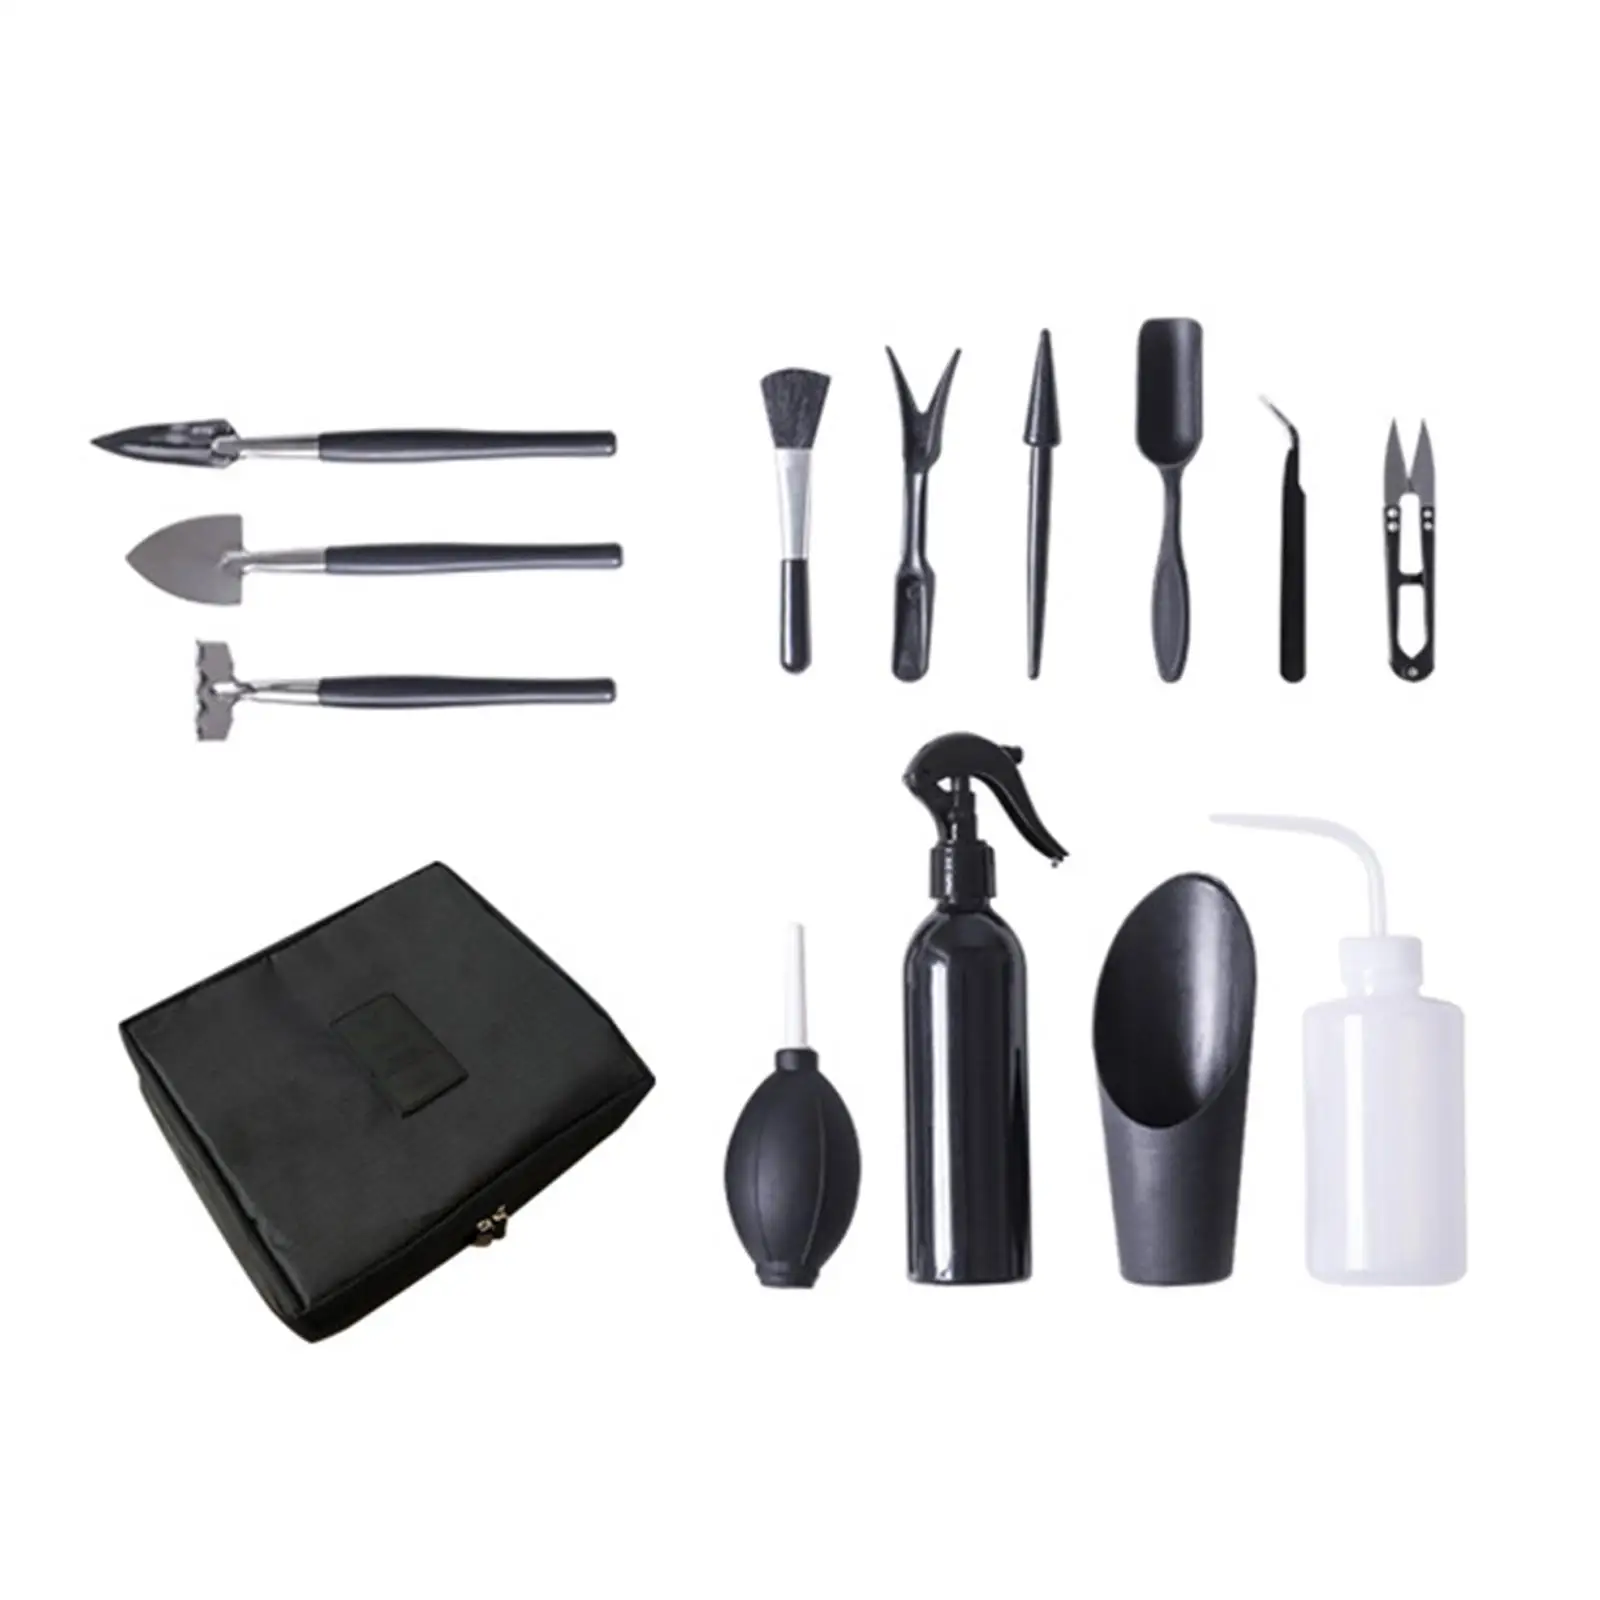 Succulent Hand Transplanting Tools 13 Pieces Set for Miniature Planting Wide Range Uses Easy to Carry Accessory Lightweight